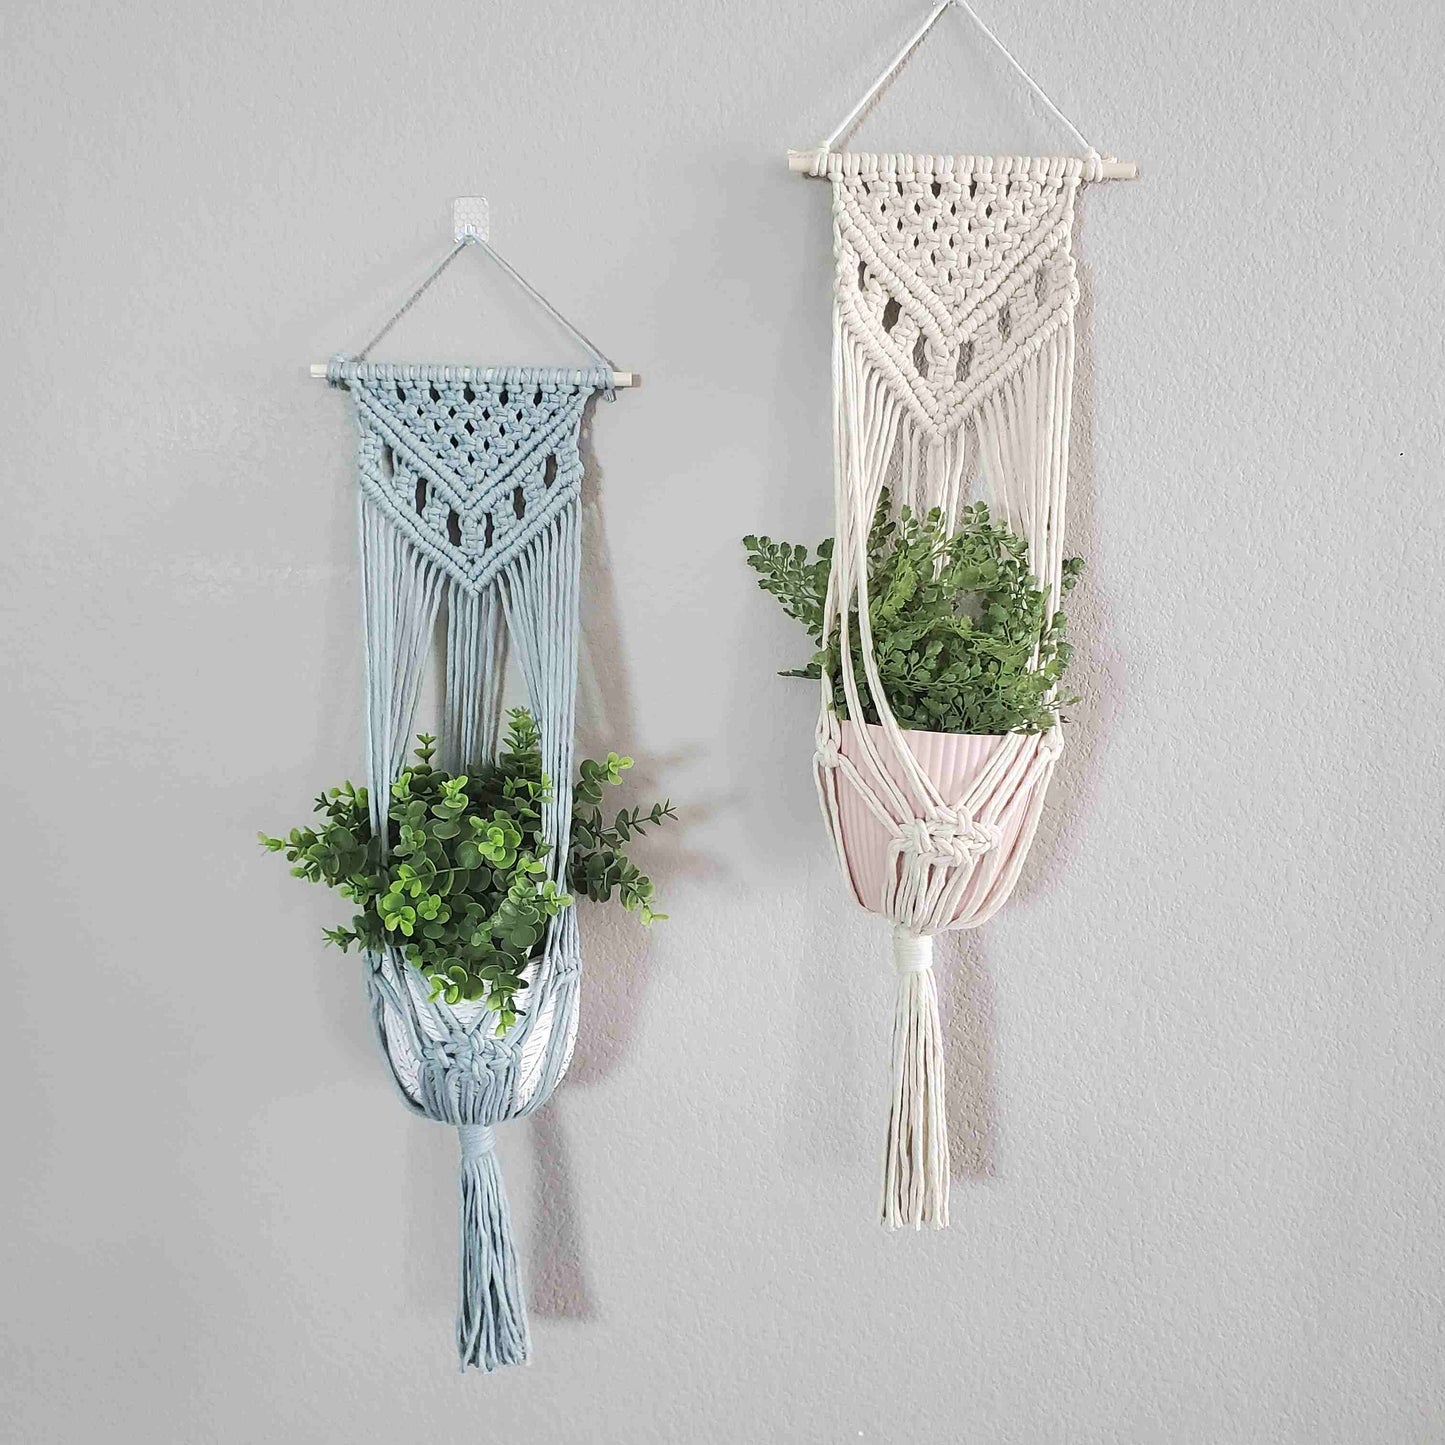 Beginner macrame plant hanger kit. Craft kits for adults and kids. Bohemian home and wall decor diy kit.